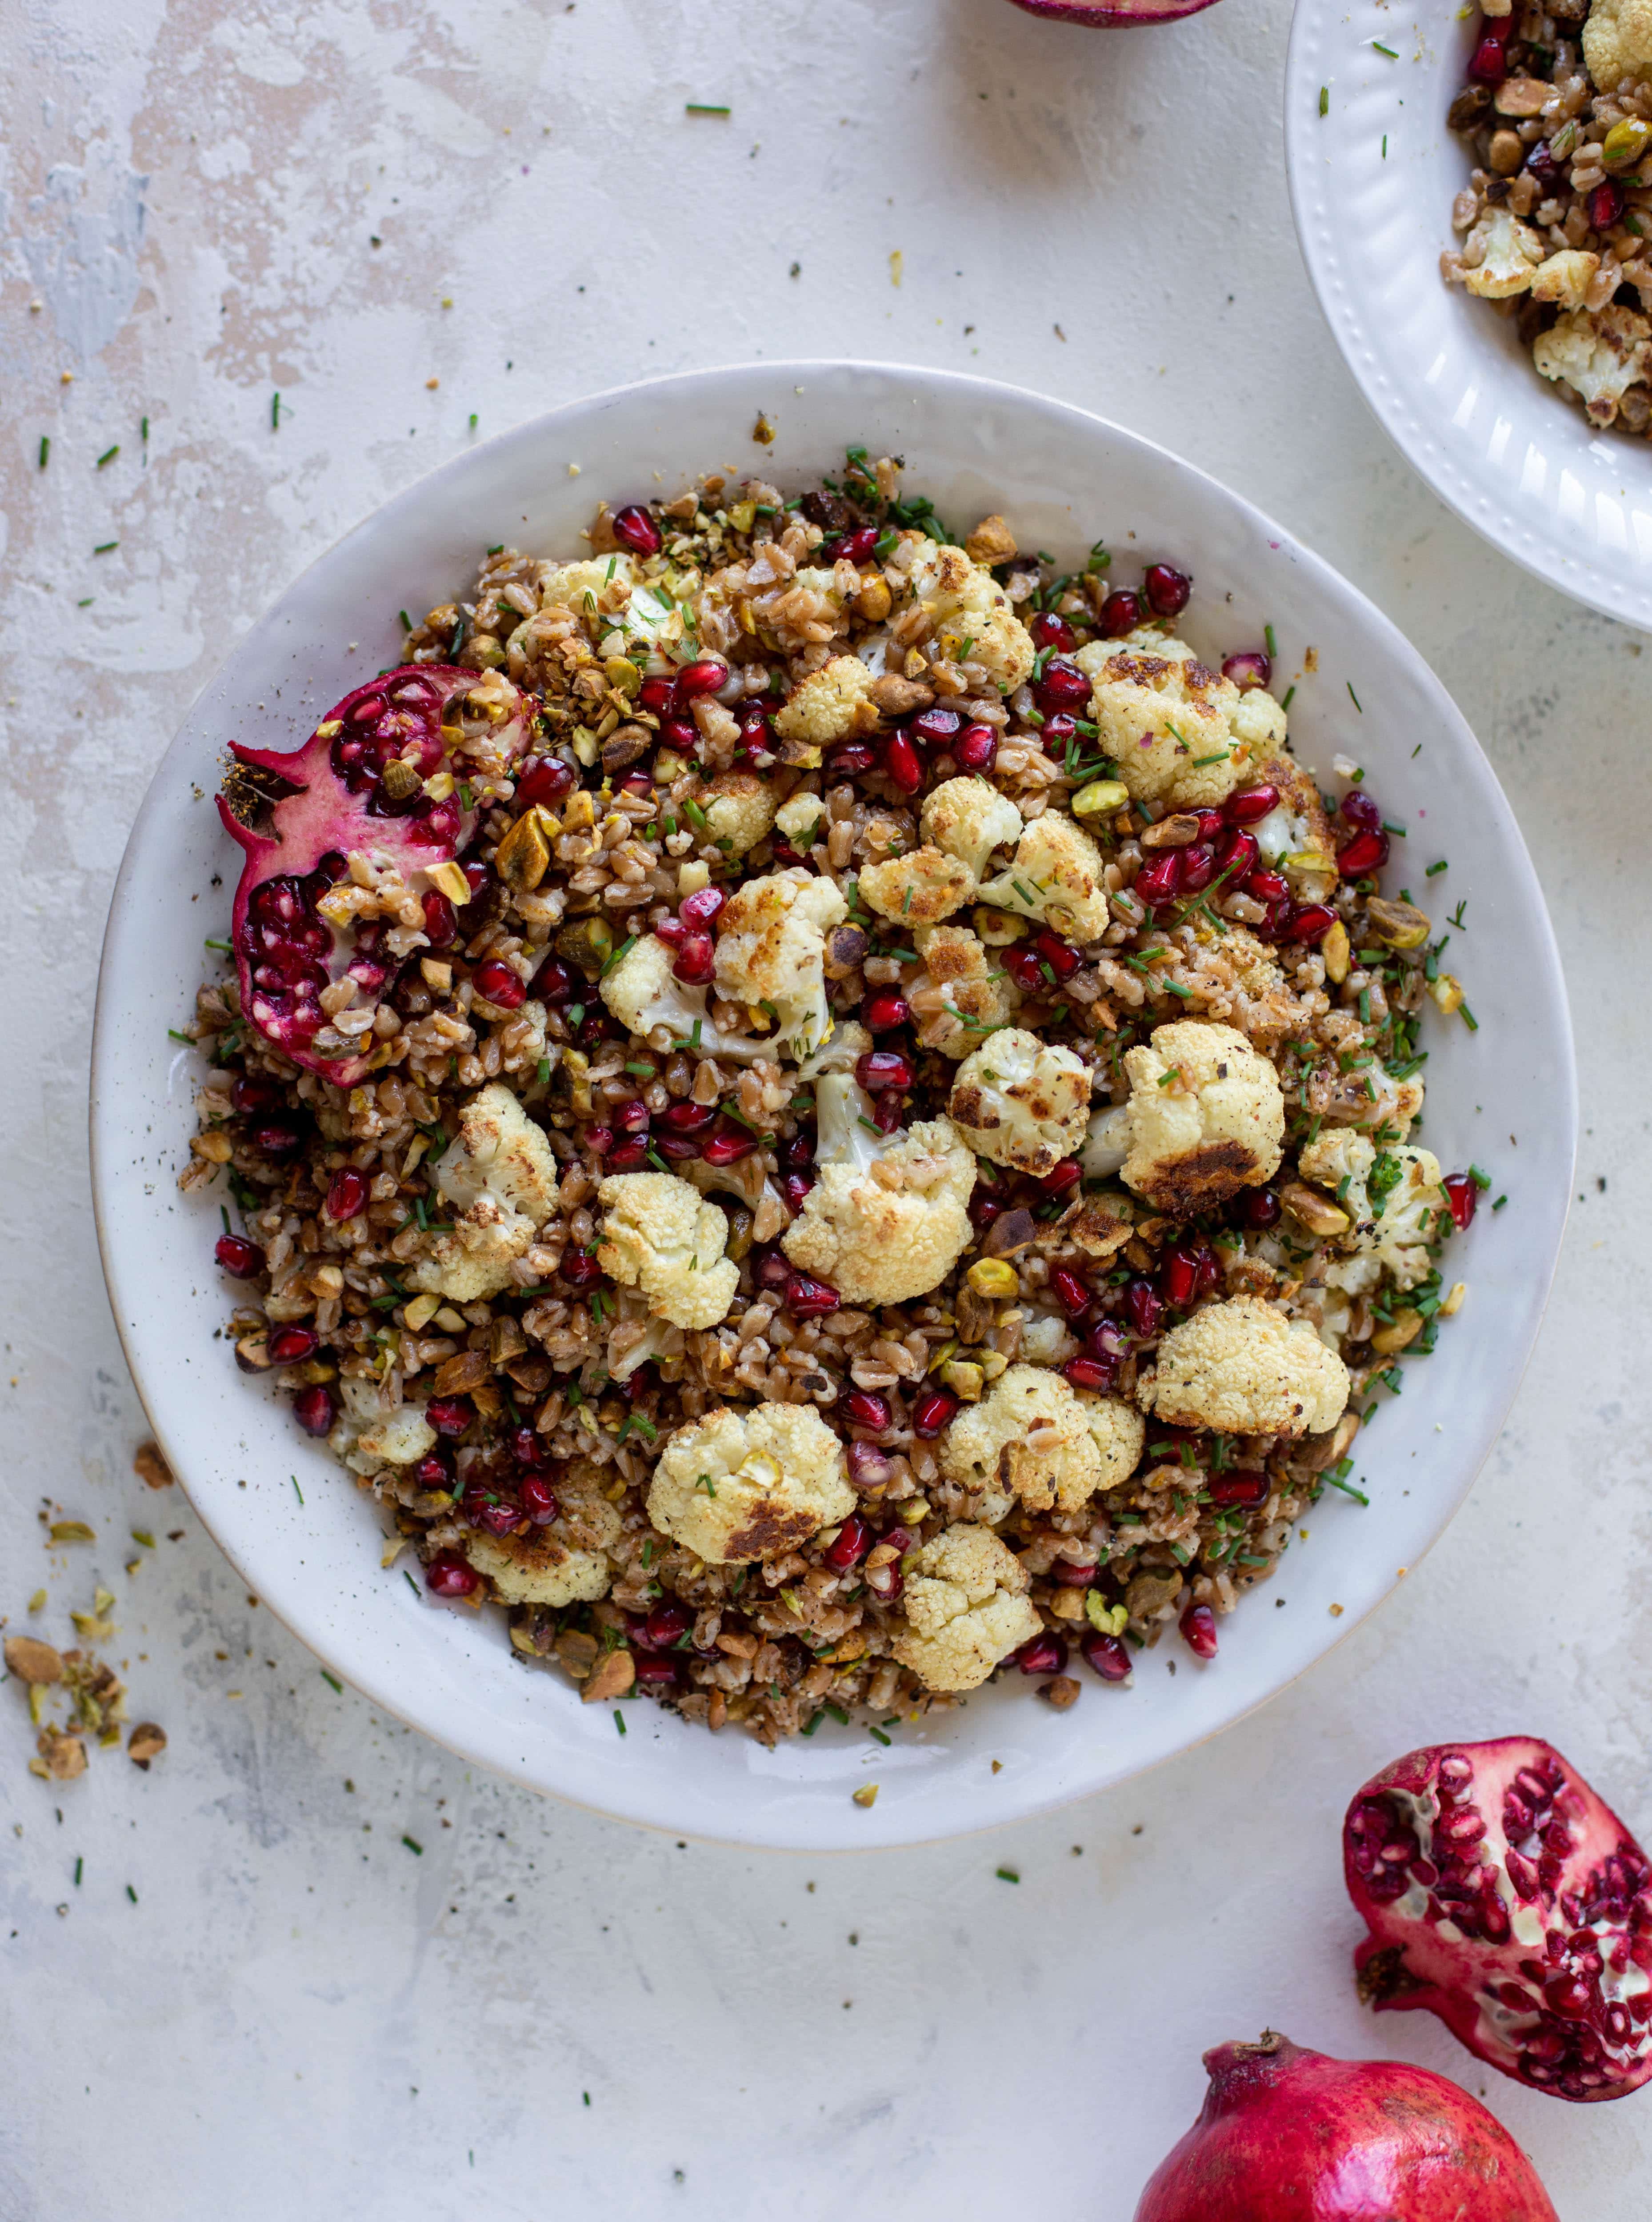 This cauliflower farro salad is filled with roasted cauliflower, pistachios, pomegranates and drizzled with a dill vinaigrette. Delicious!